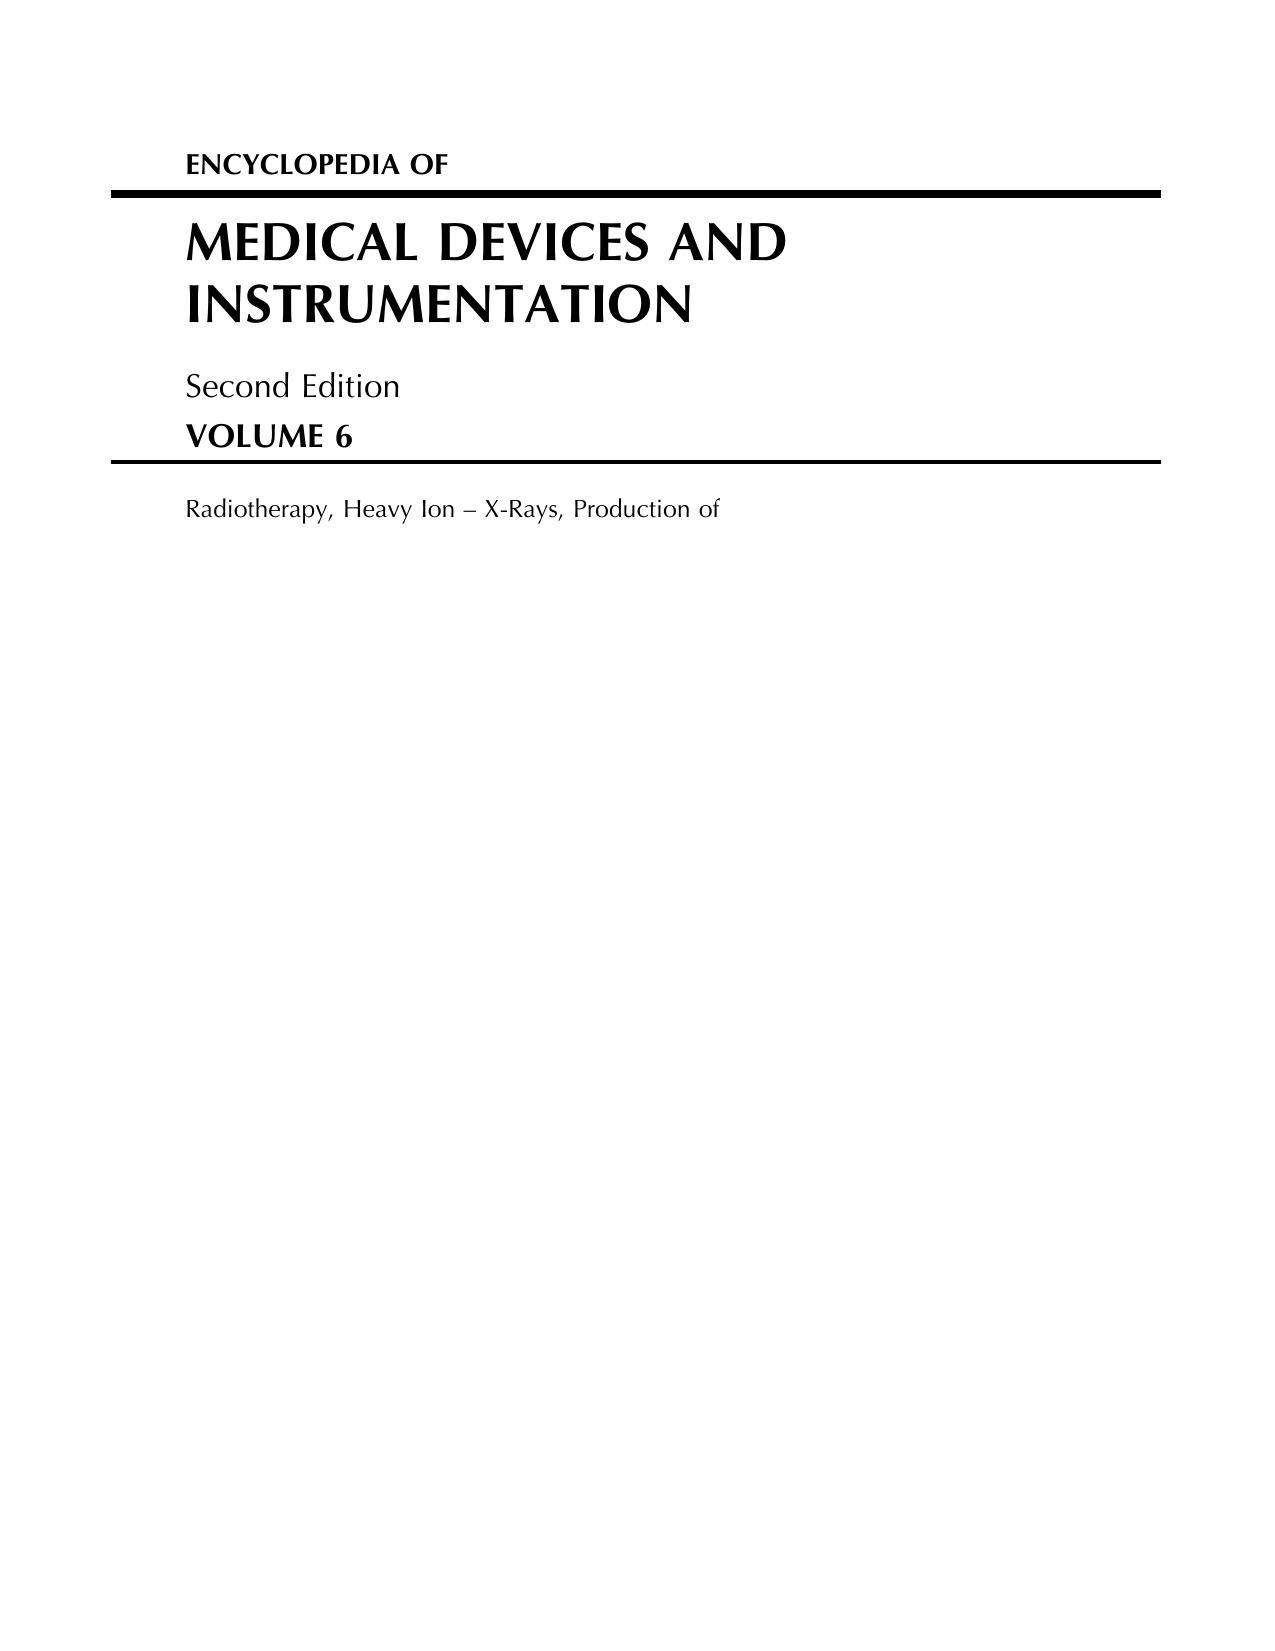 Wiley - Encyclopedia of Medical Devices and Instrumentation